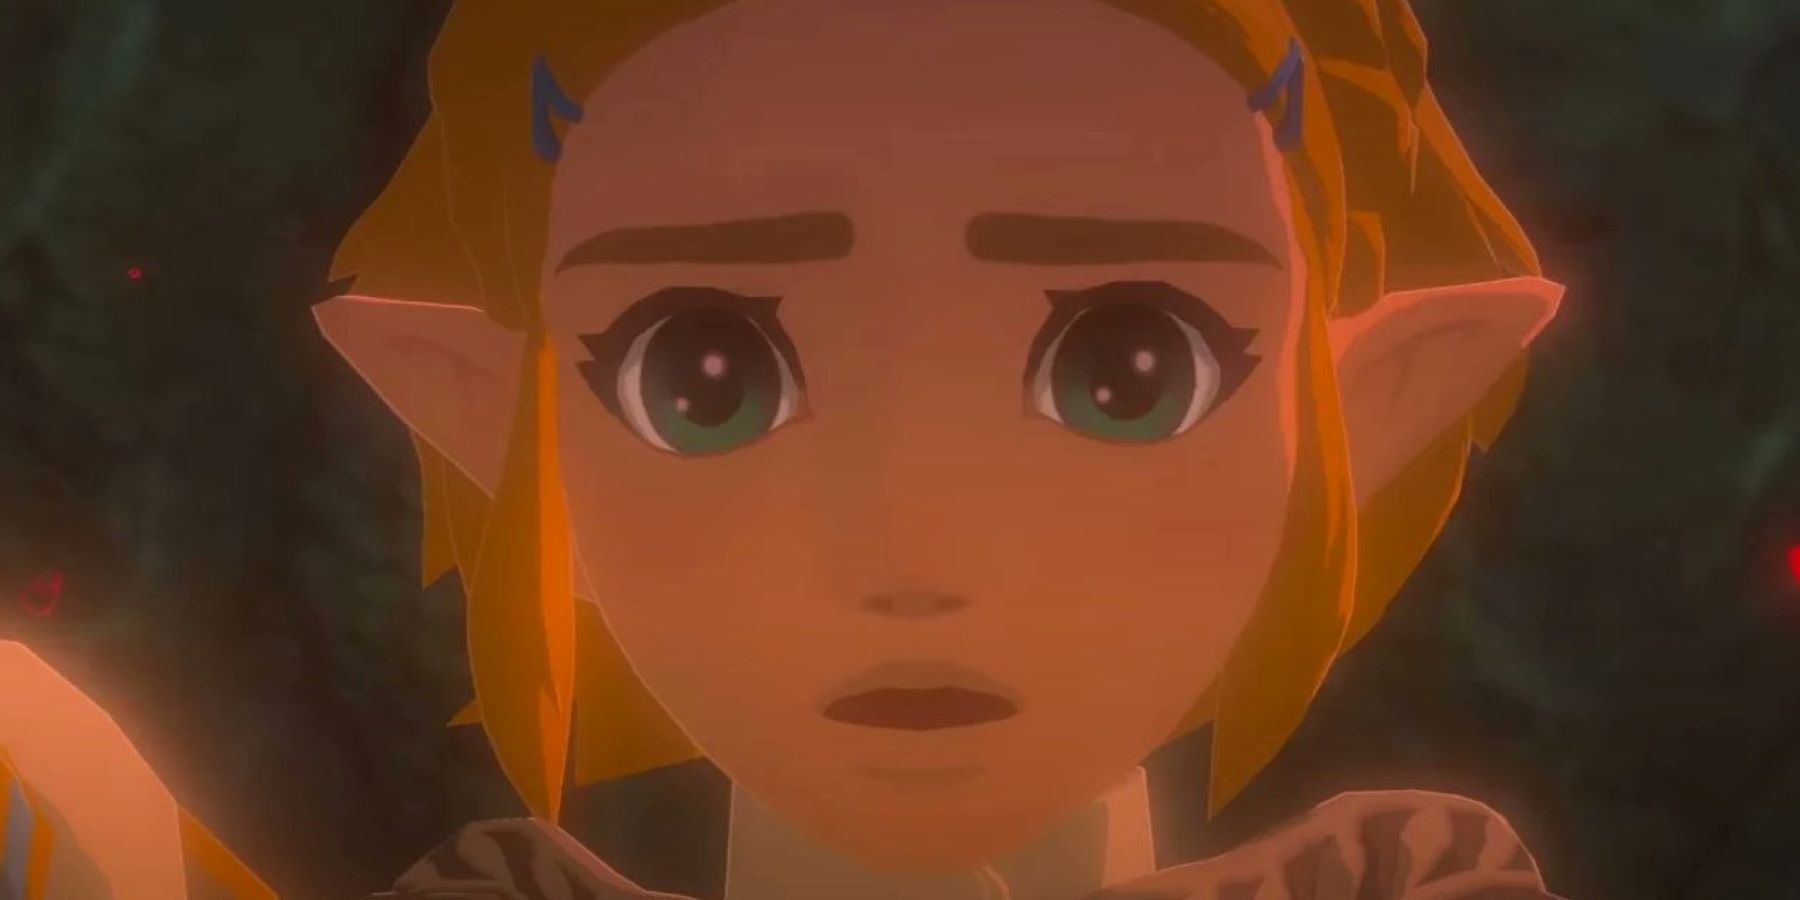 Princess Zelda falling in the second trailer for The Legend of Zelda: Breath of the Wild 2